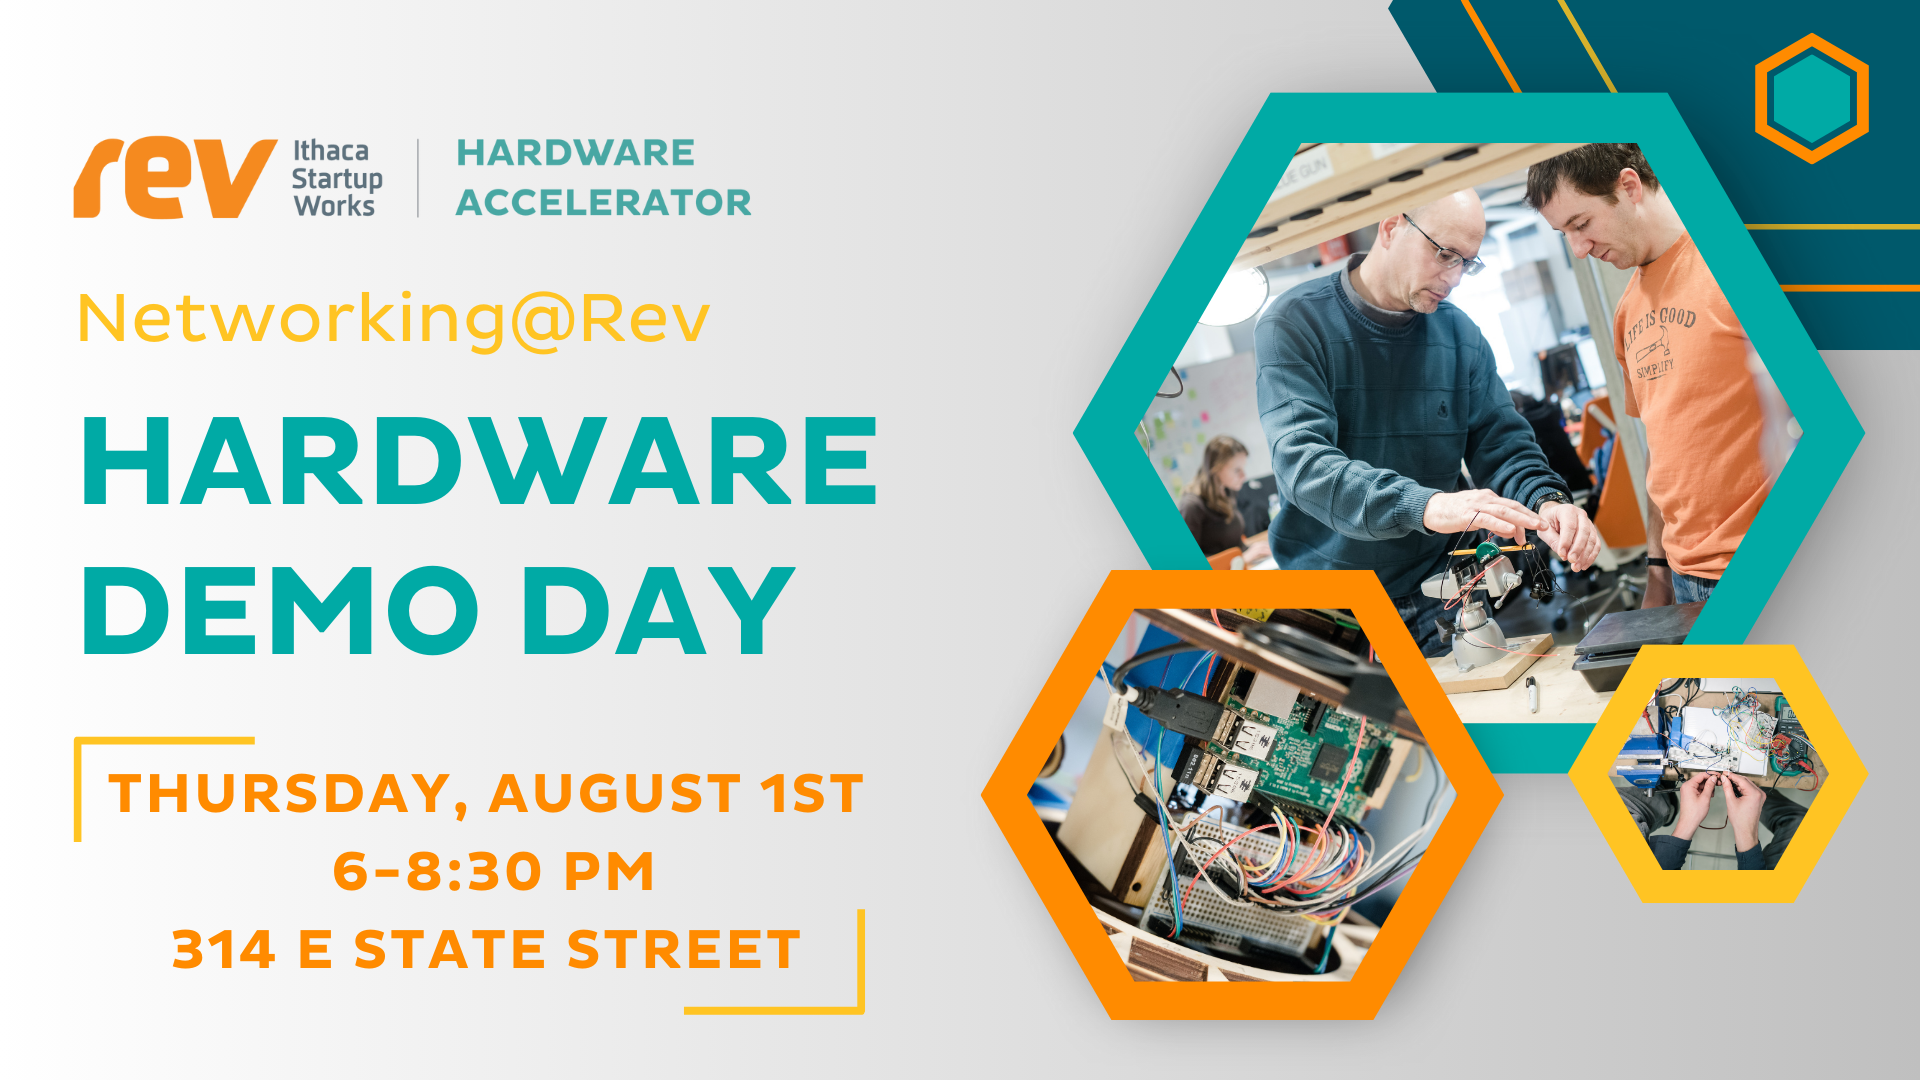 Hardware Demo Day on August 1st.